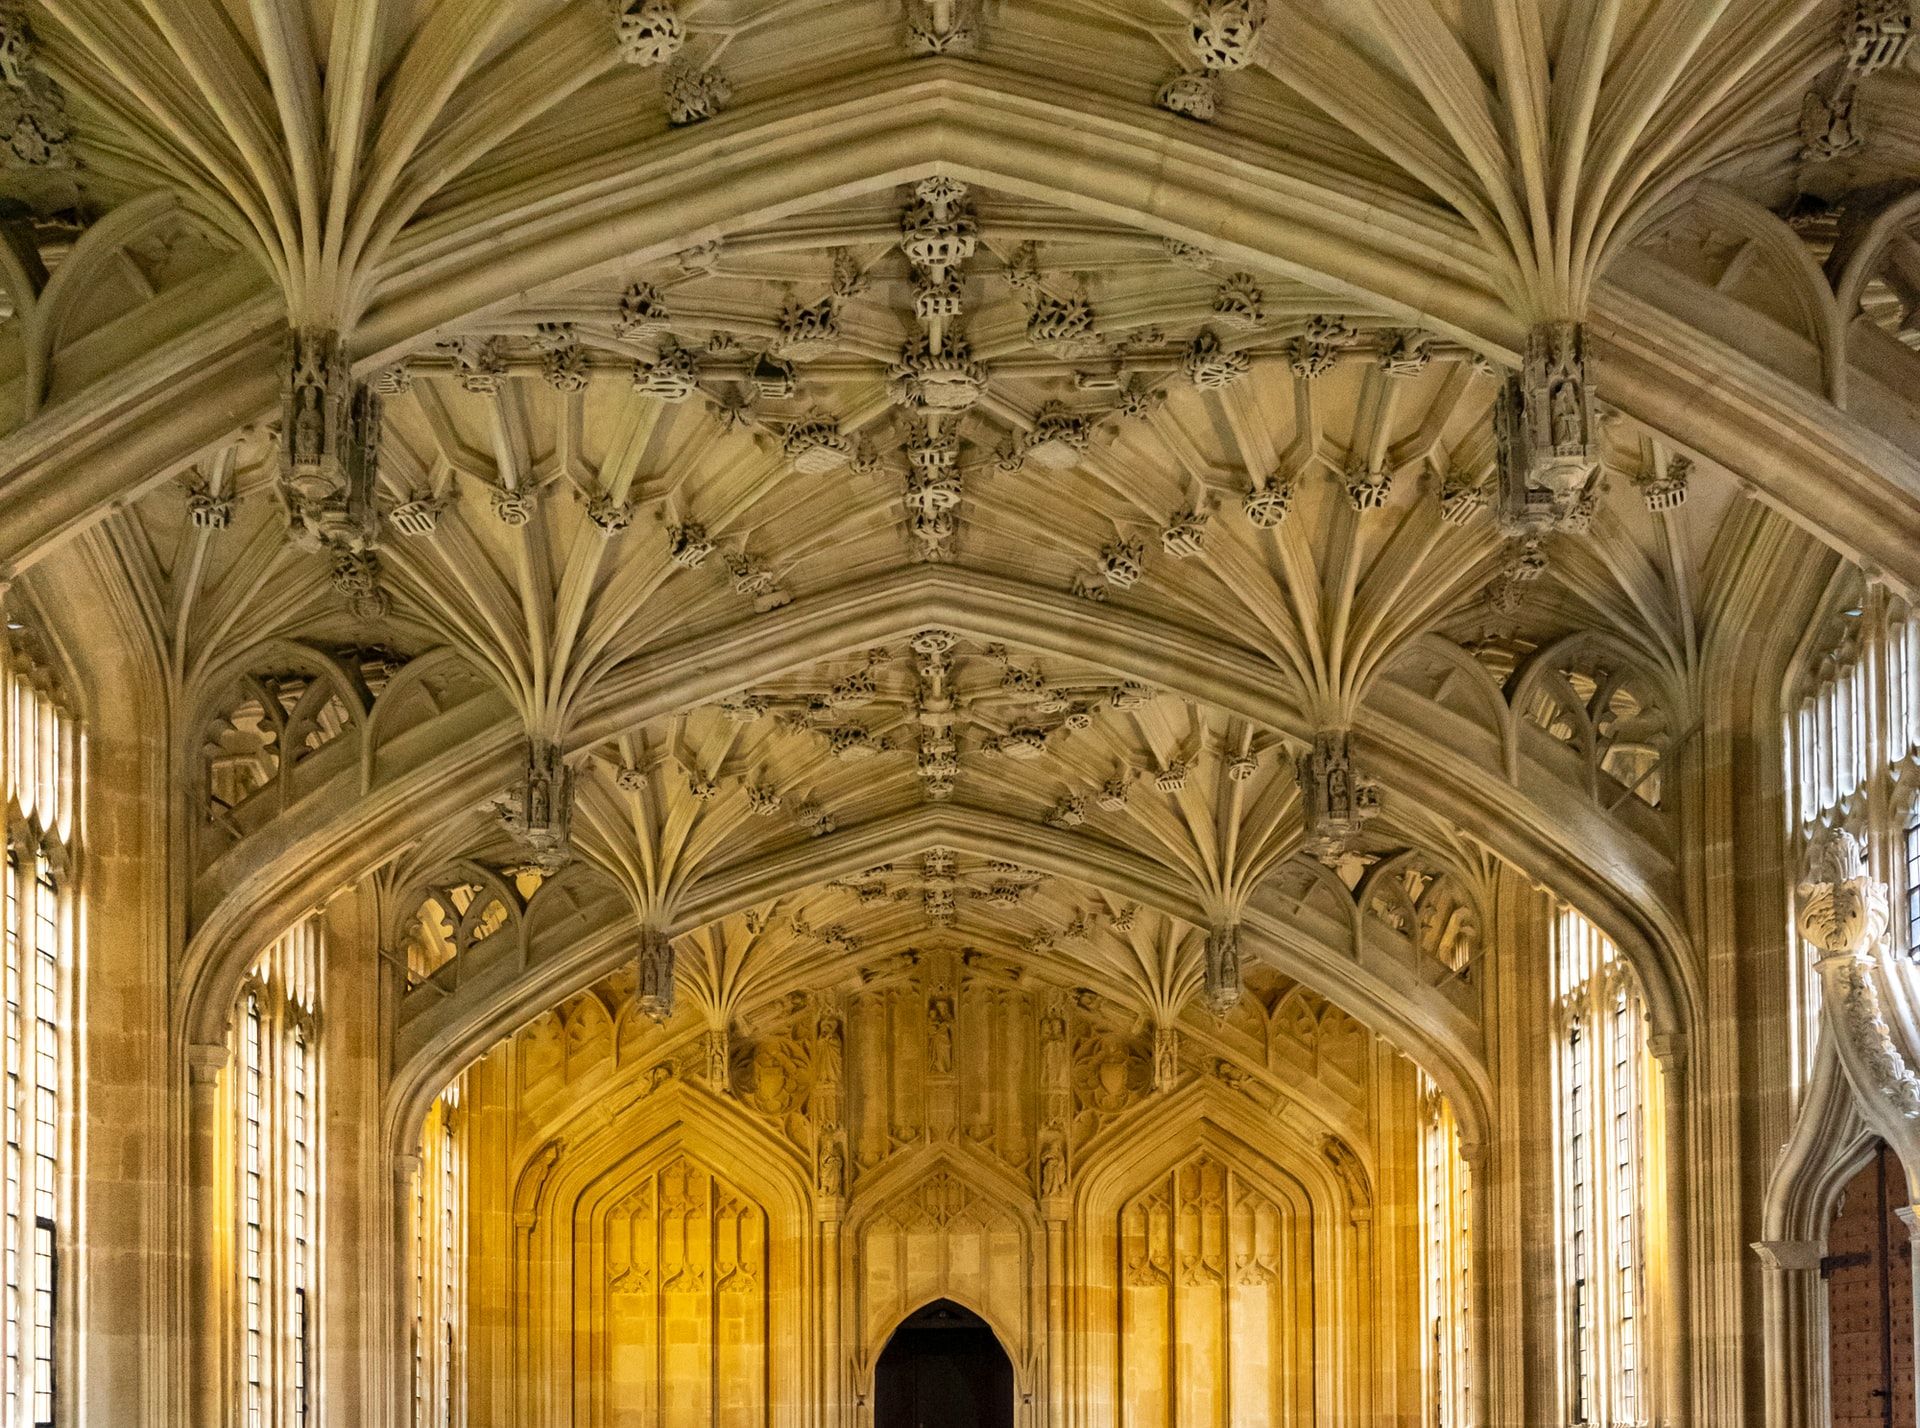 Interior shot of the ceiling of the Bodleian library